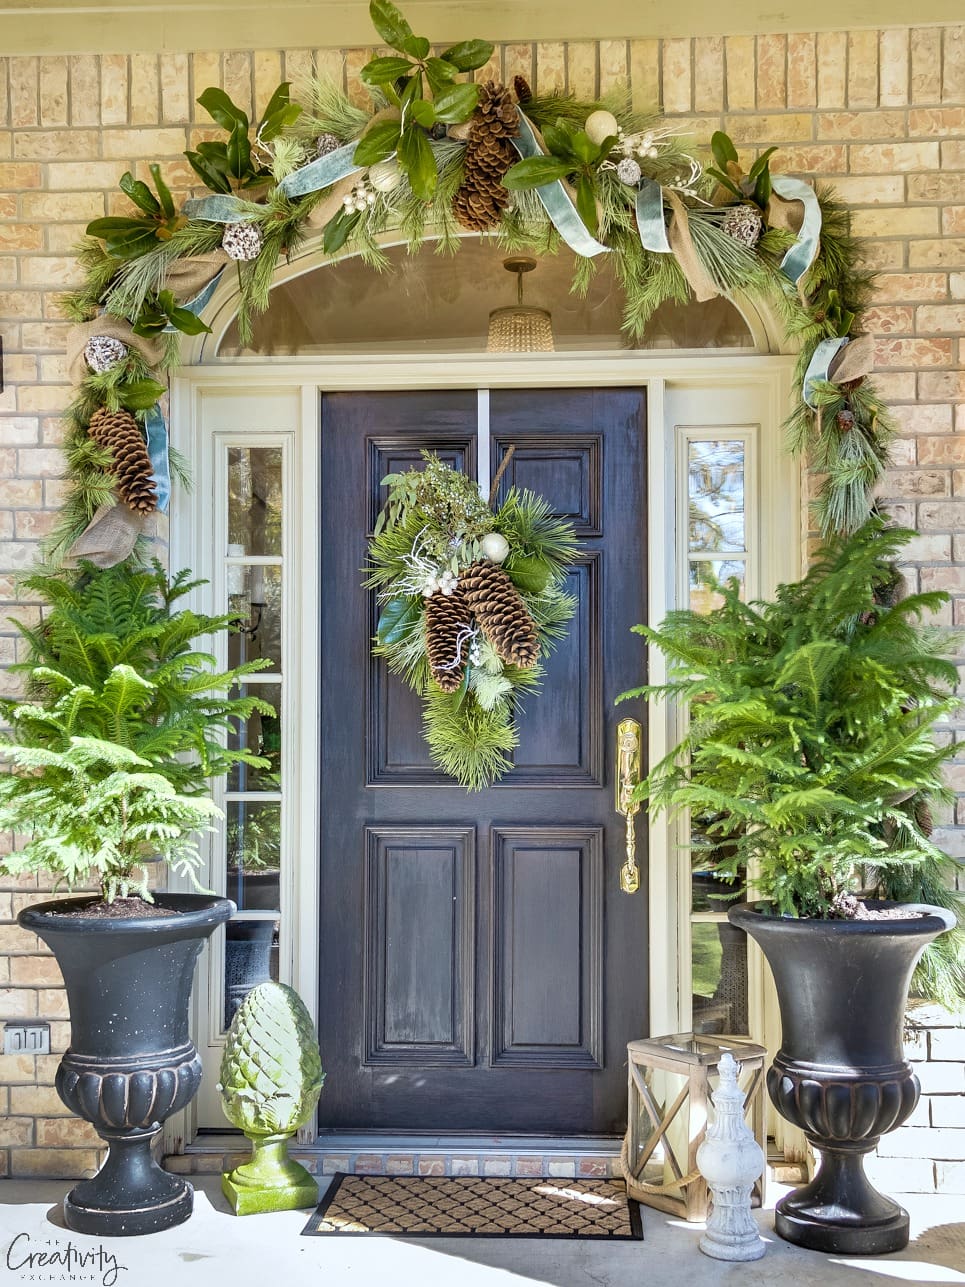 Gorgeous garland and oversized urns make this a gorgeous Christmas porch! #christmasporch #Christmasdecor #Christmasideas